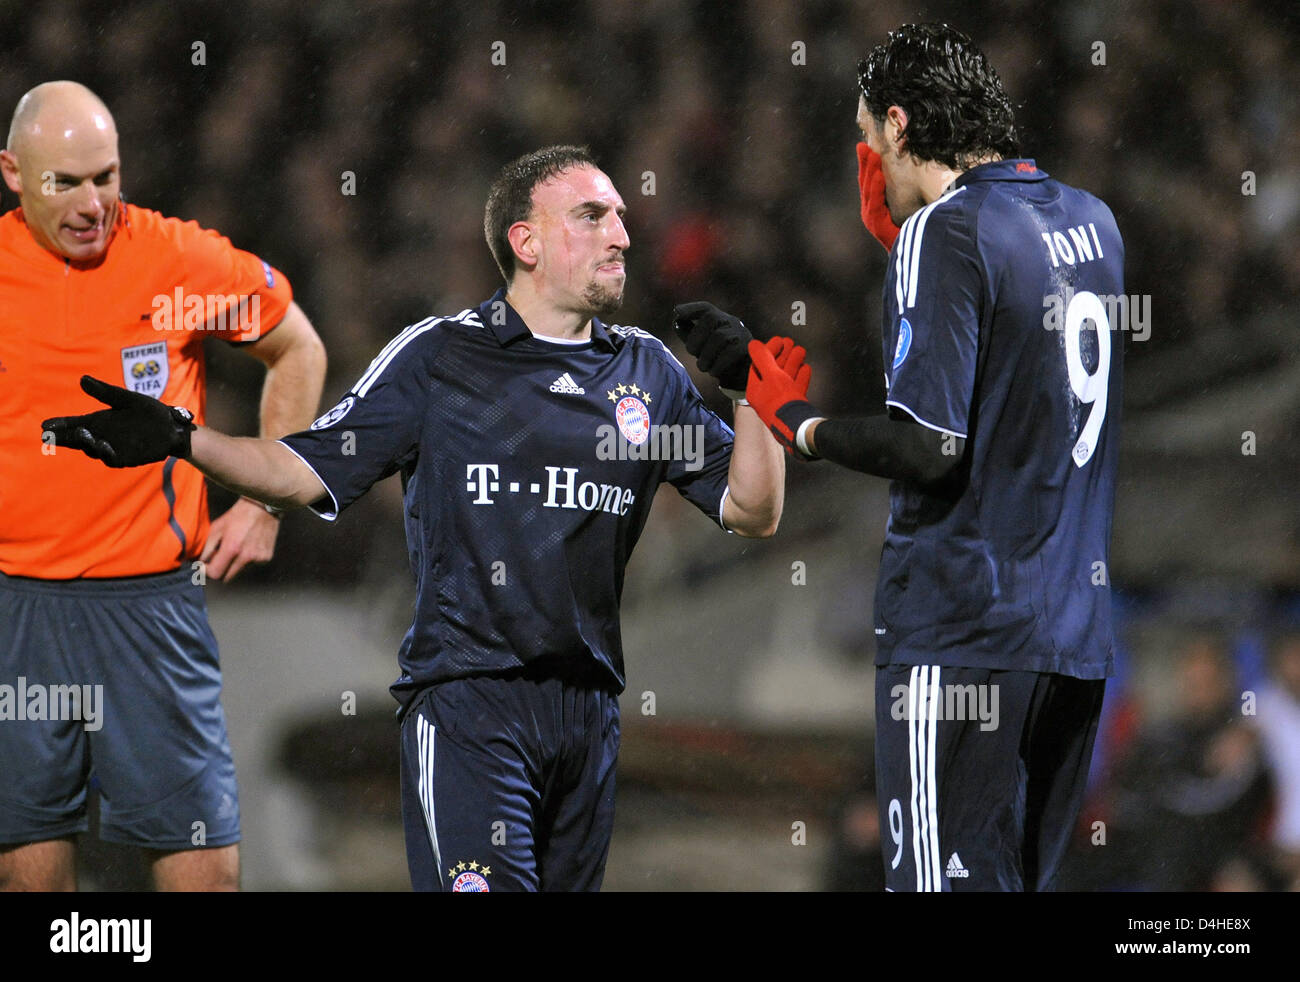 FC Bayern Munich players Franck Ribery (C) and Luca Toni quarrel during the Champions League Group F match against Olympique Lyon at Stade de Gerland in Lyon, France, 10 December 2008. Bayern Munich defeated Lyon 3-2 securing the first place in UEFA Champions League Group F. Photo: Andreas Gebert Stock Photo